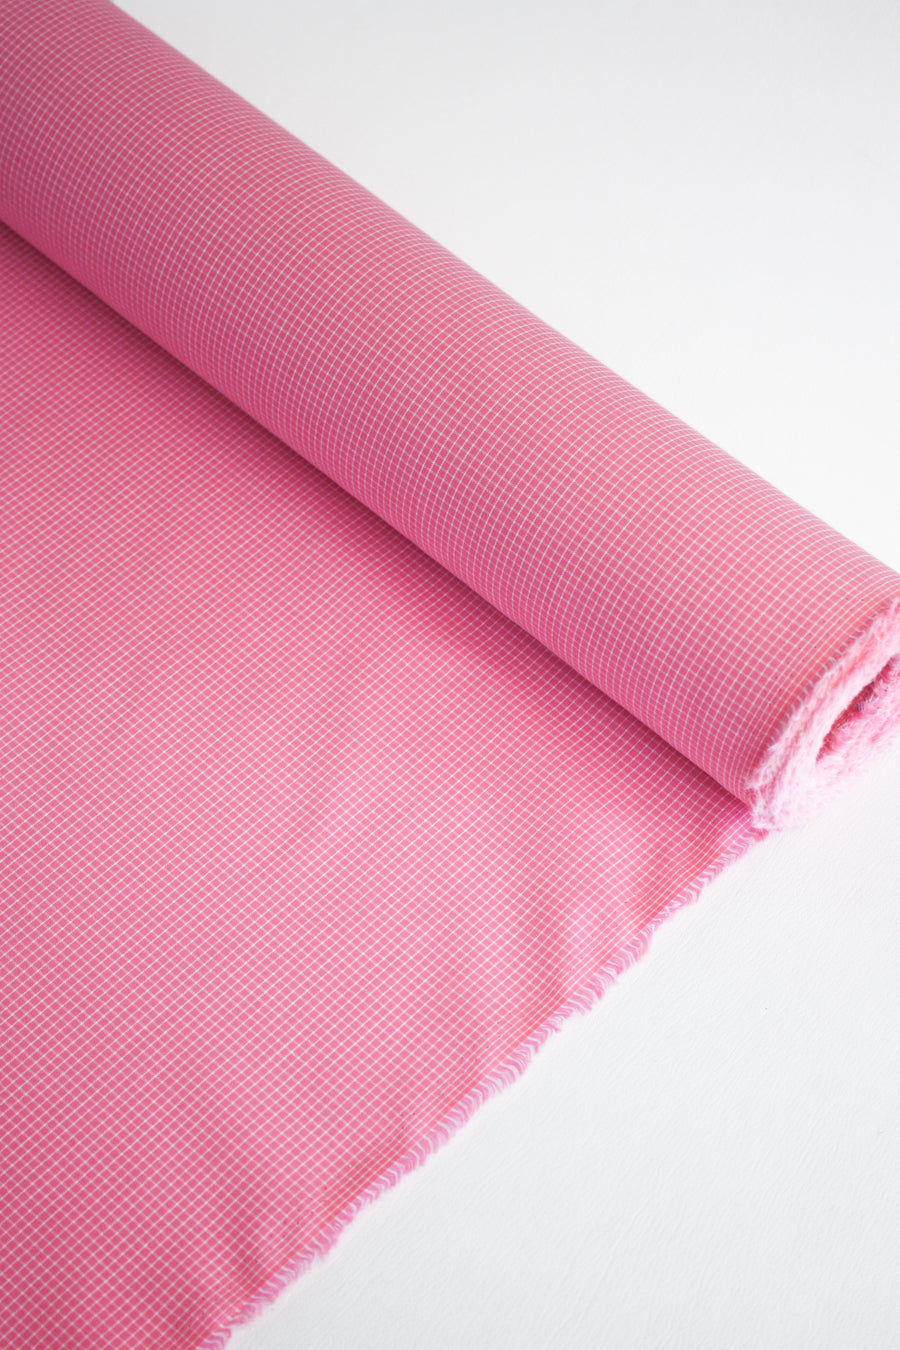 Hitome - Yarn Dyed Cotton | Rose #3